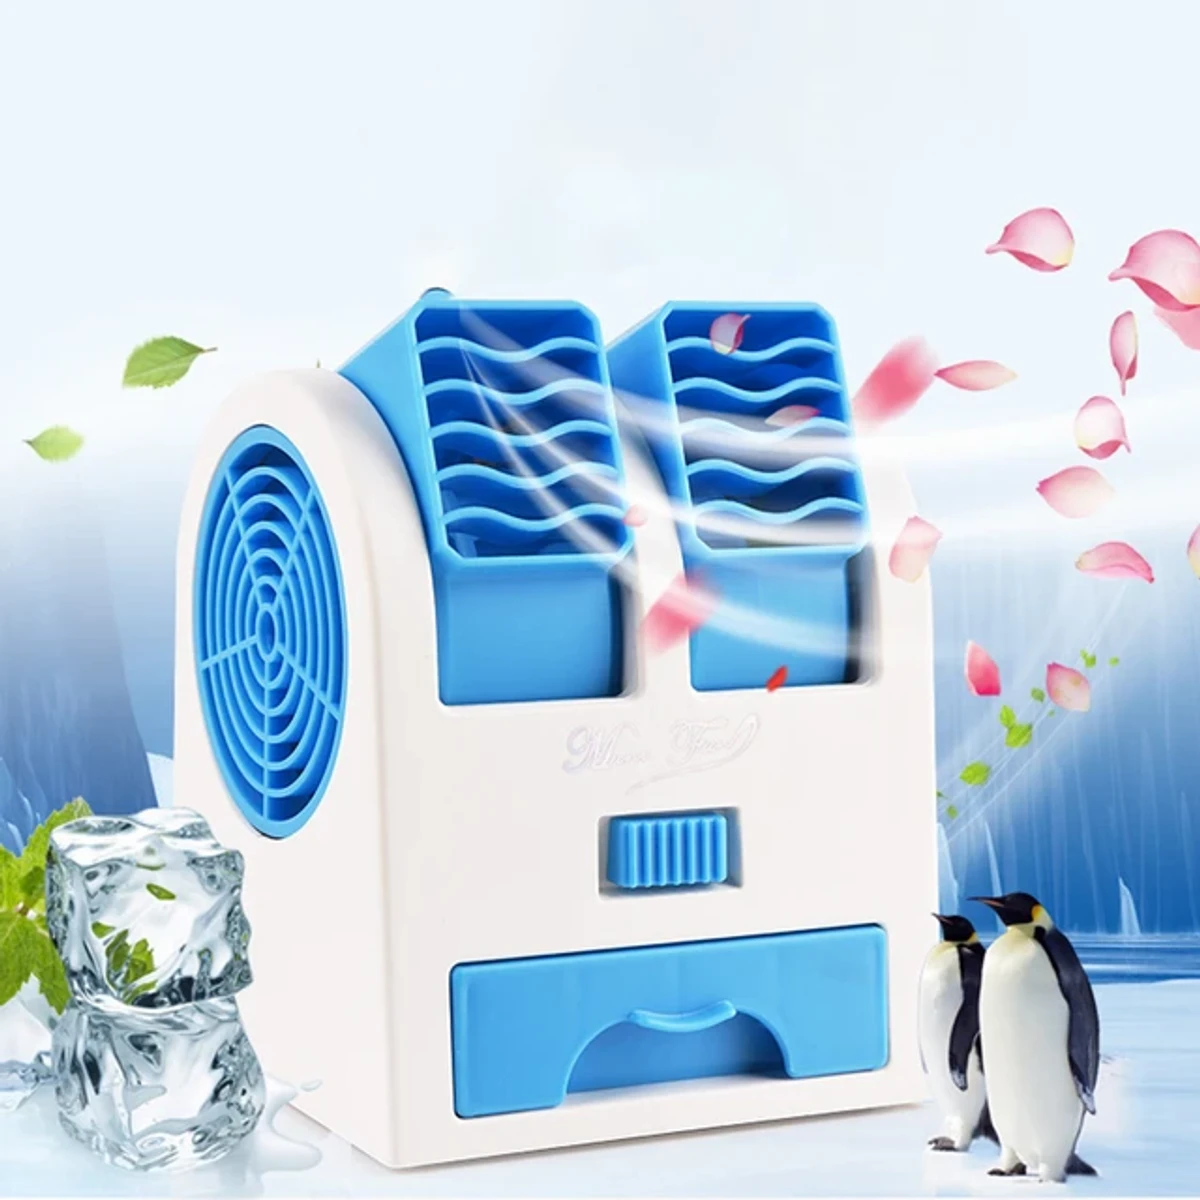 Portable Cooler/Air Conditioning Fan USB Mini Cooler/air conditioning fan portable car-mounted micro air conditioner(JY-011)